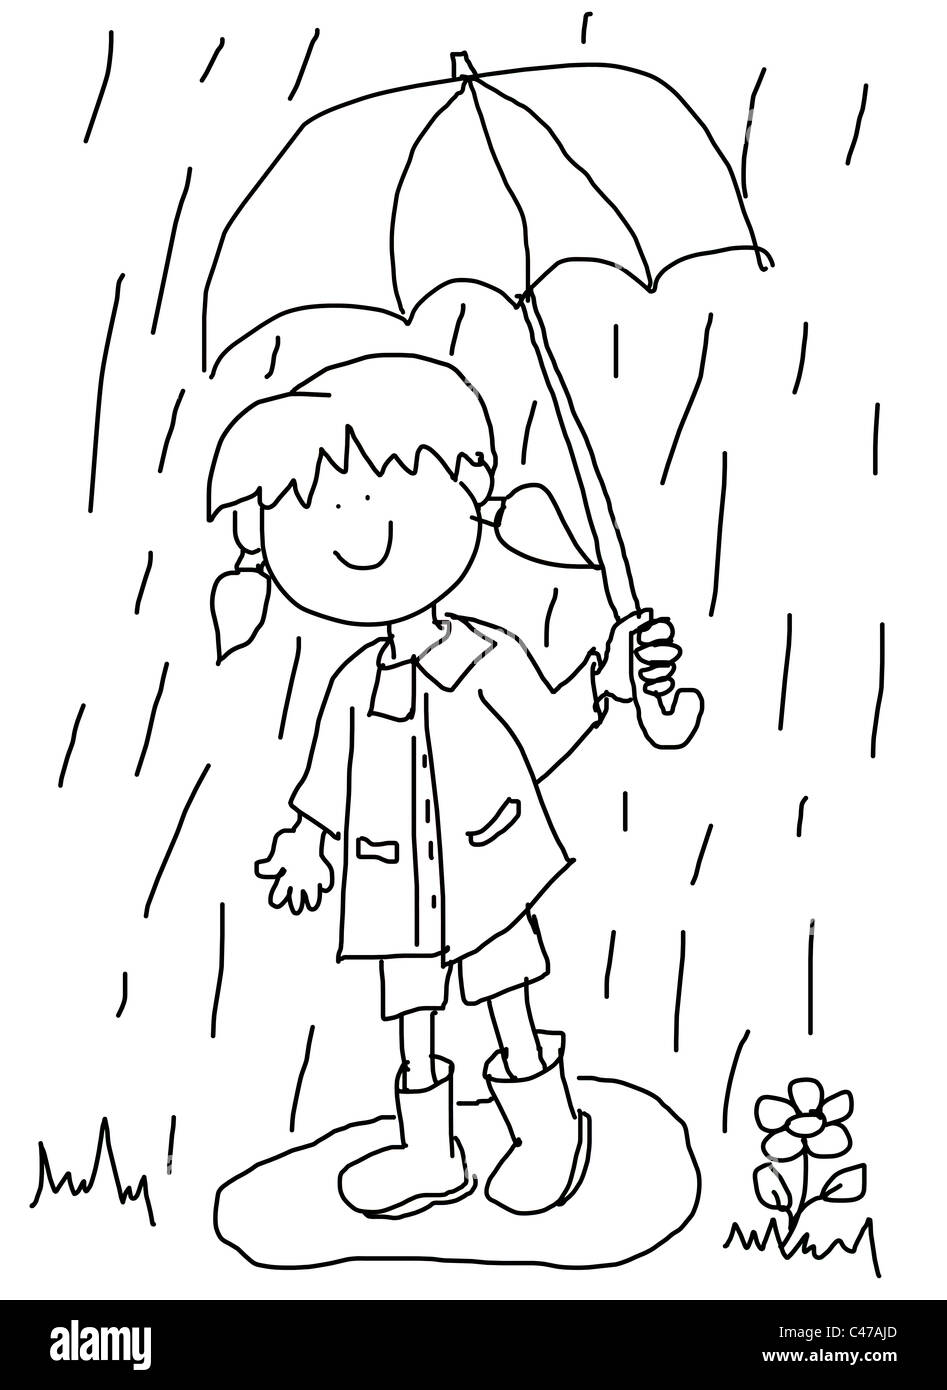 Cute little girl outline drawing playing in a water puddle while holding an umbrella in the rain. Stock Photo